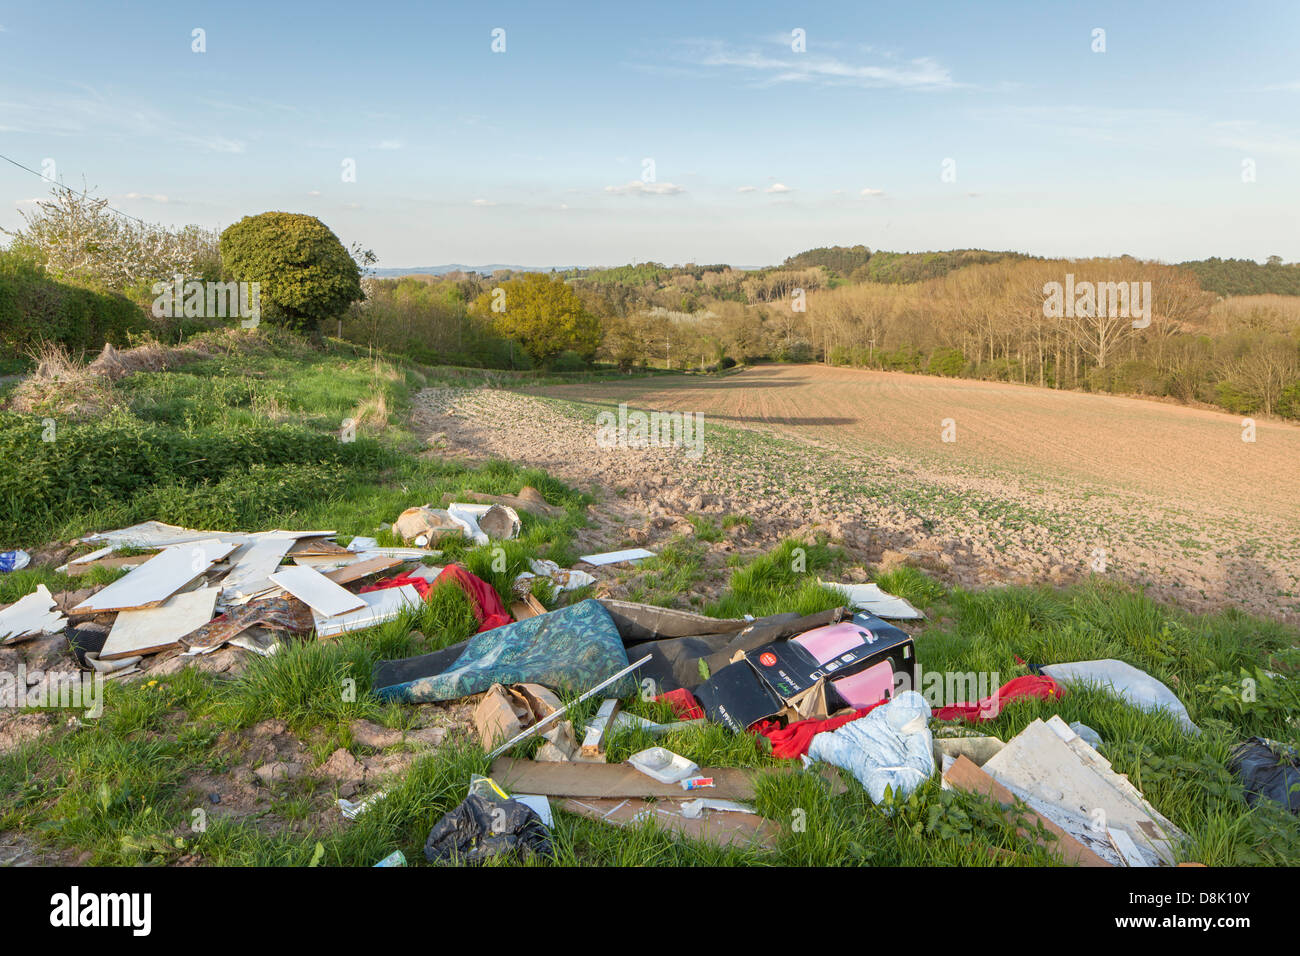 Illegal fly tipping on farmland in the English countryside, Worcestershire, England, UK Stock Photo